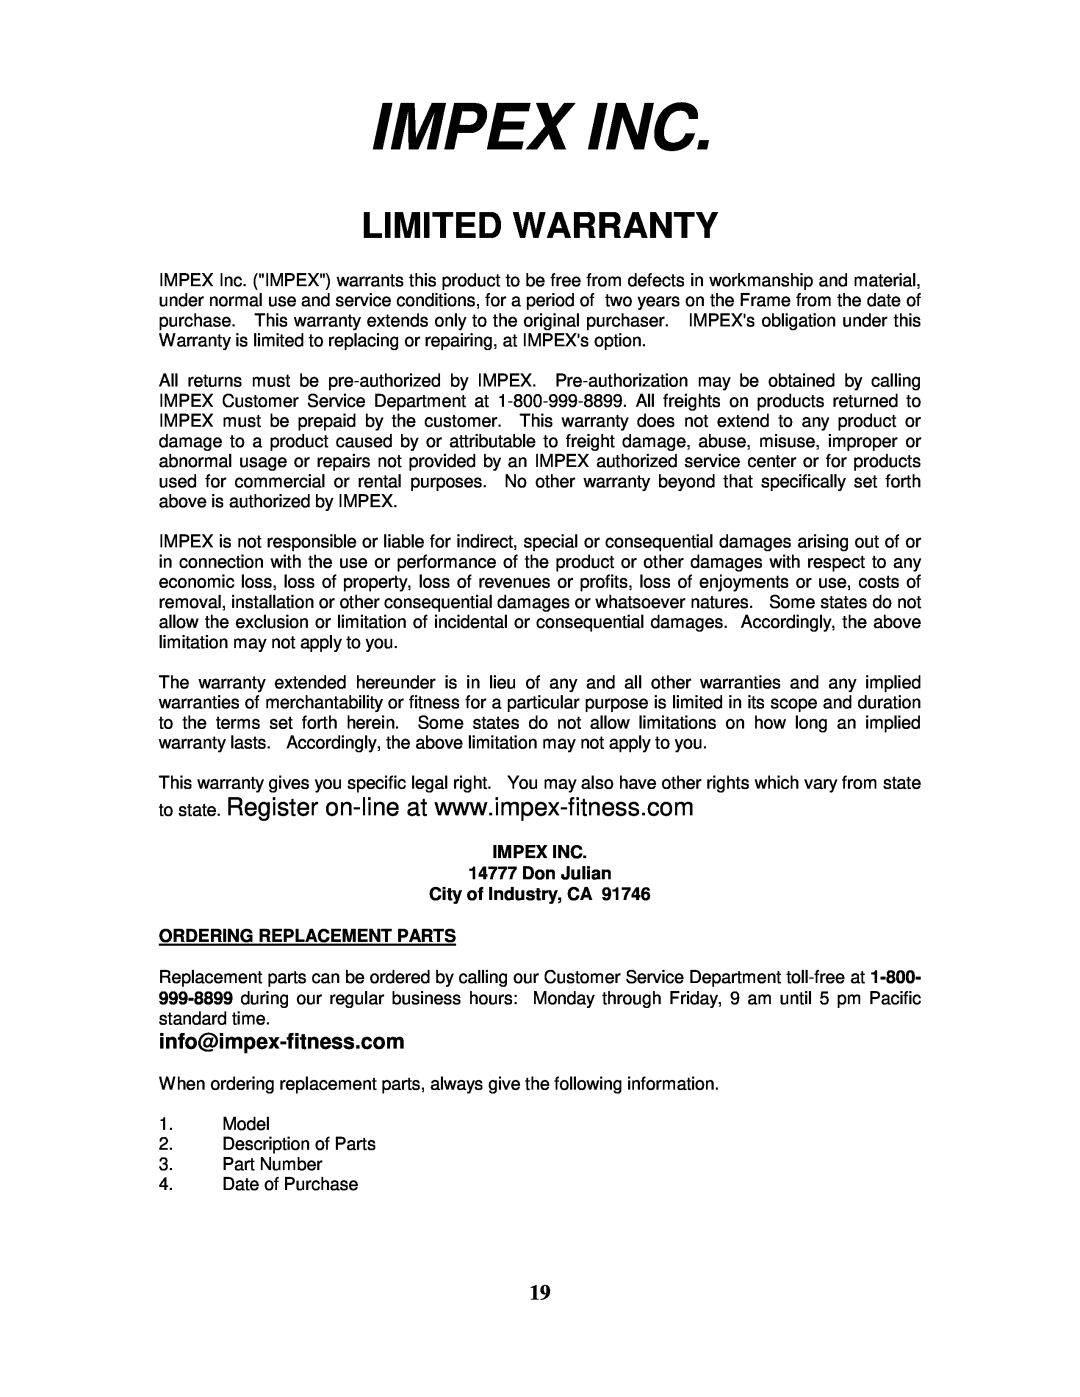 Impex WM-1501 Impex Inc, Limited Warranty, IMPEX INC 14777 Don Julian City of Industry, CA, Ordering Replacement Parts 